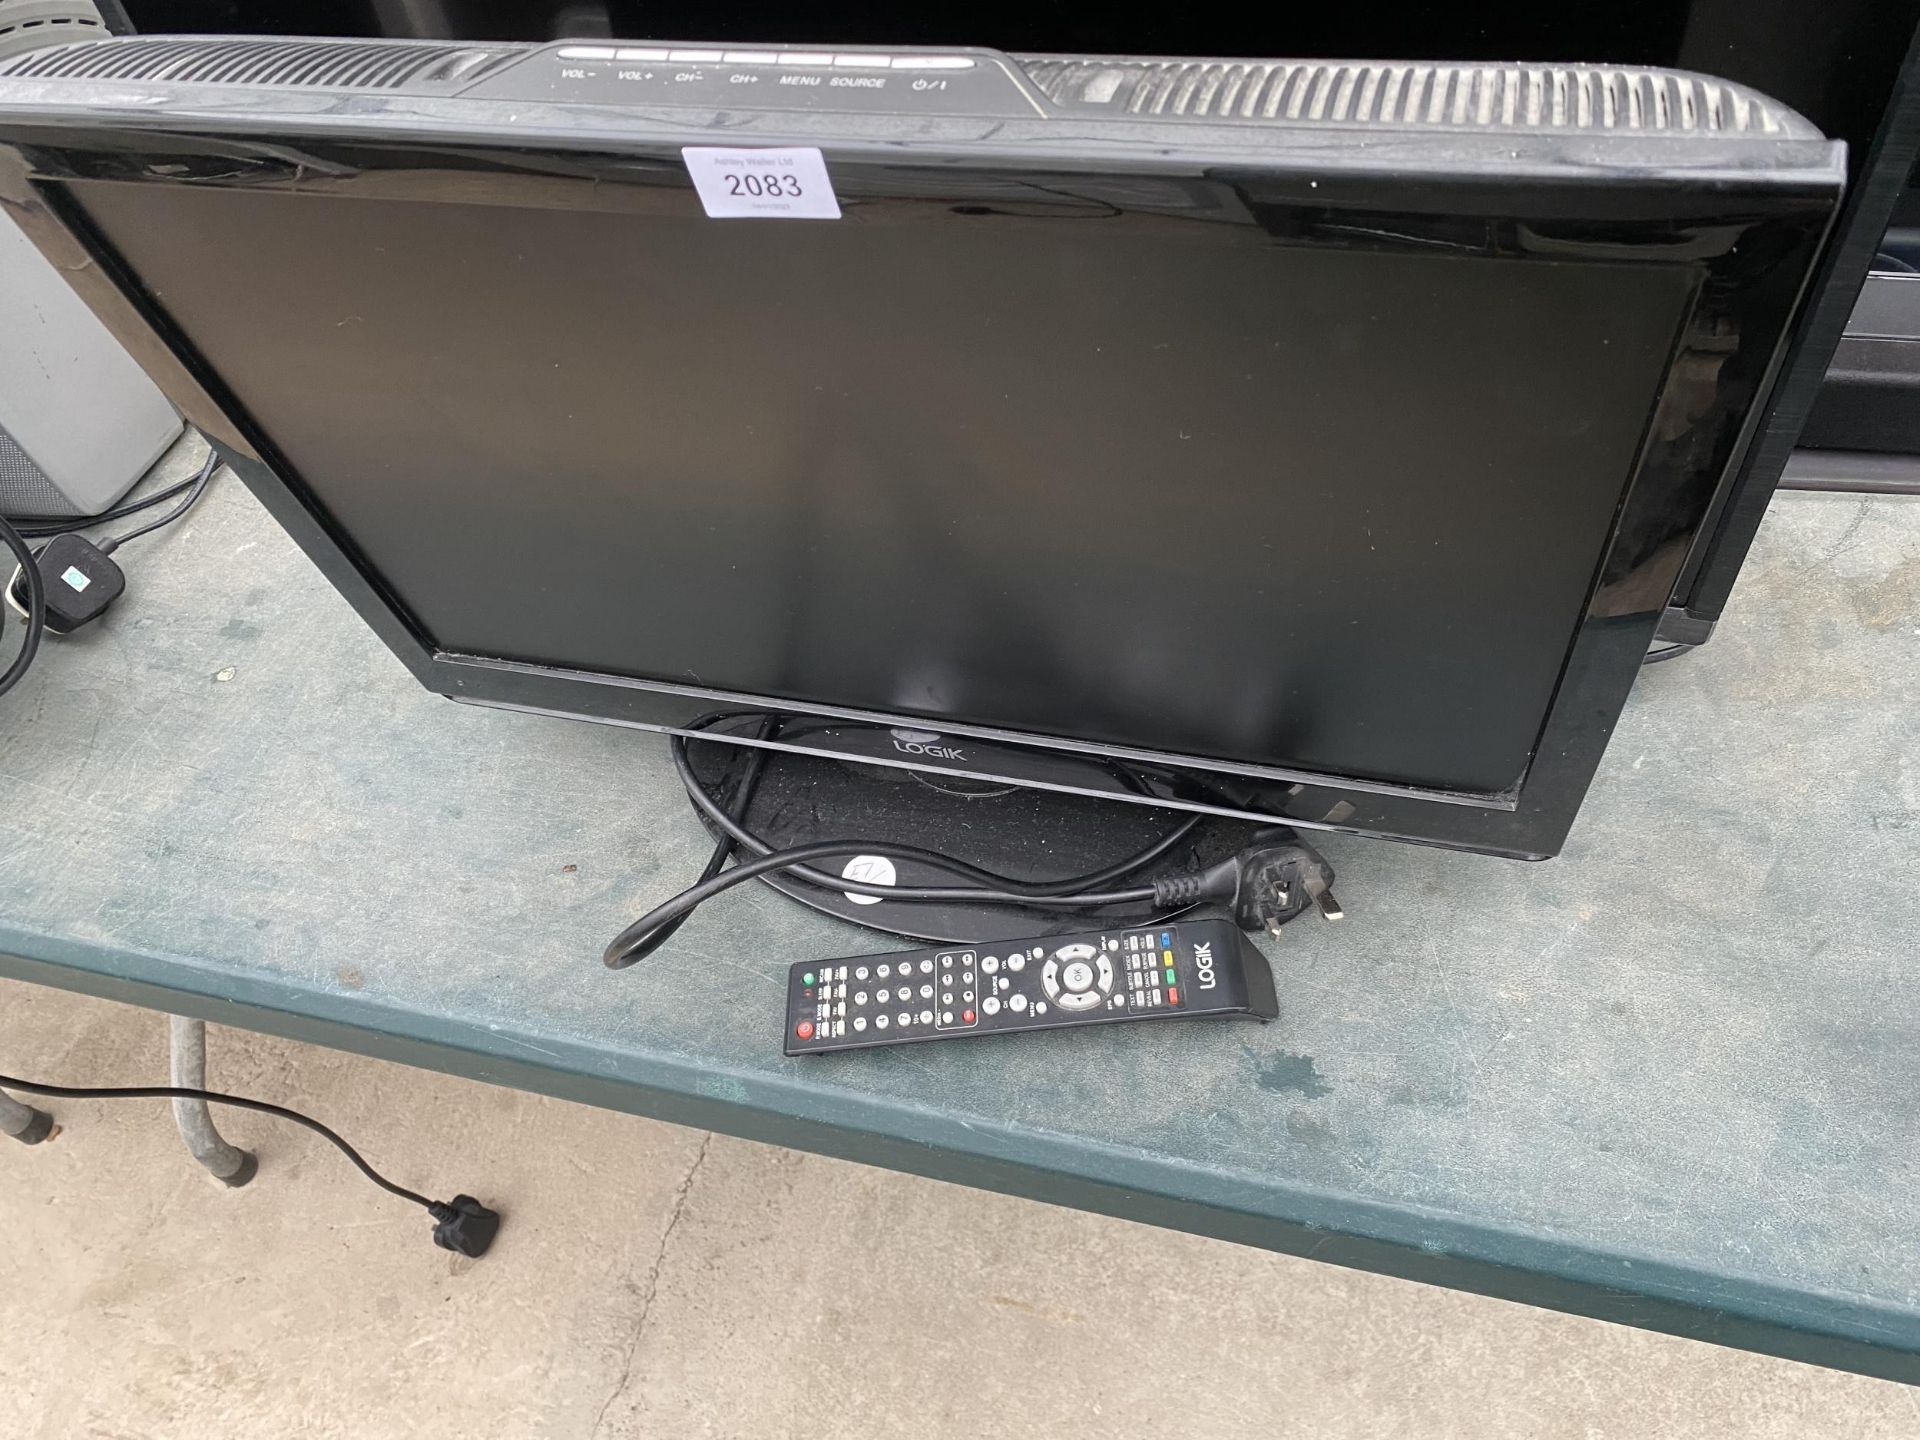 A 21" LOGIK TELEVISION WITH REMOTE CONTROL